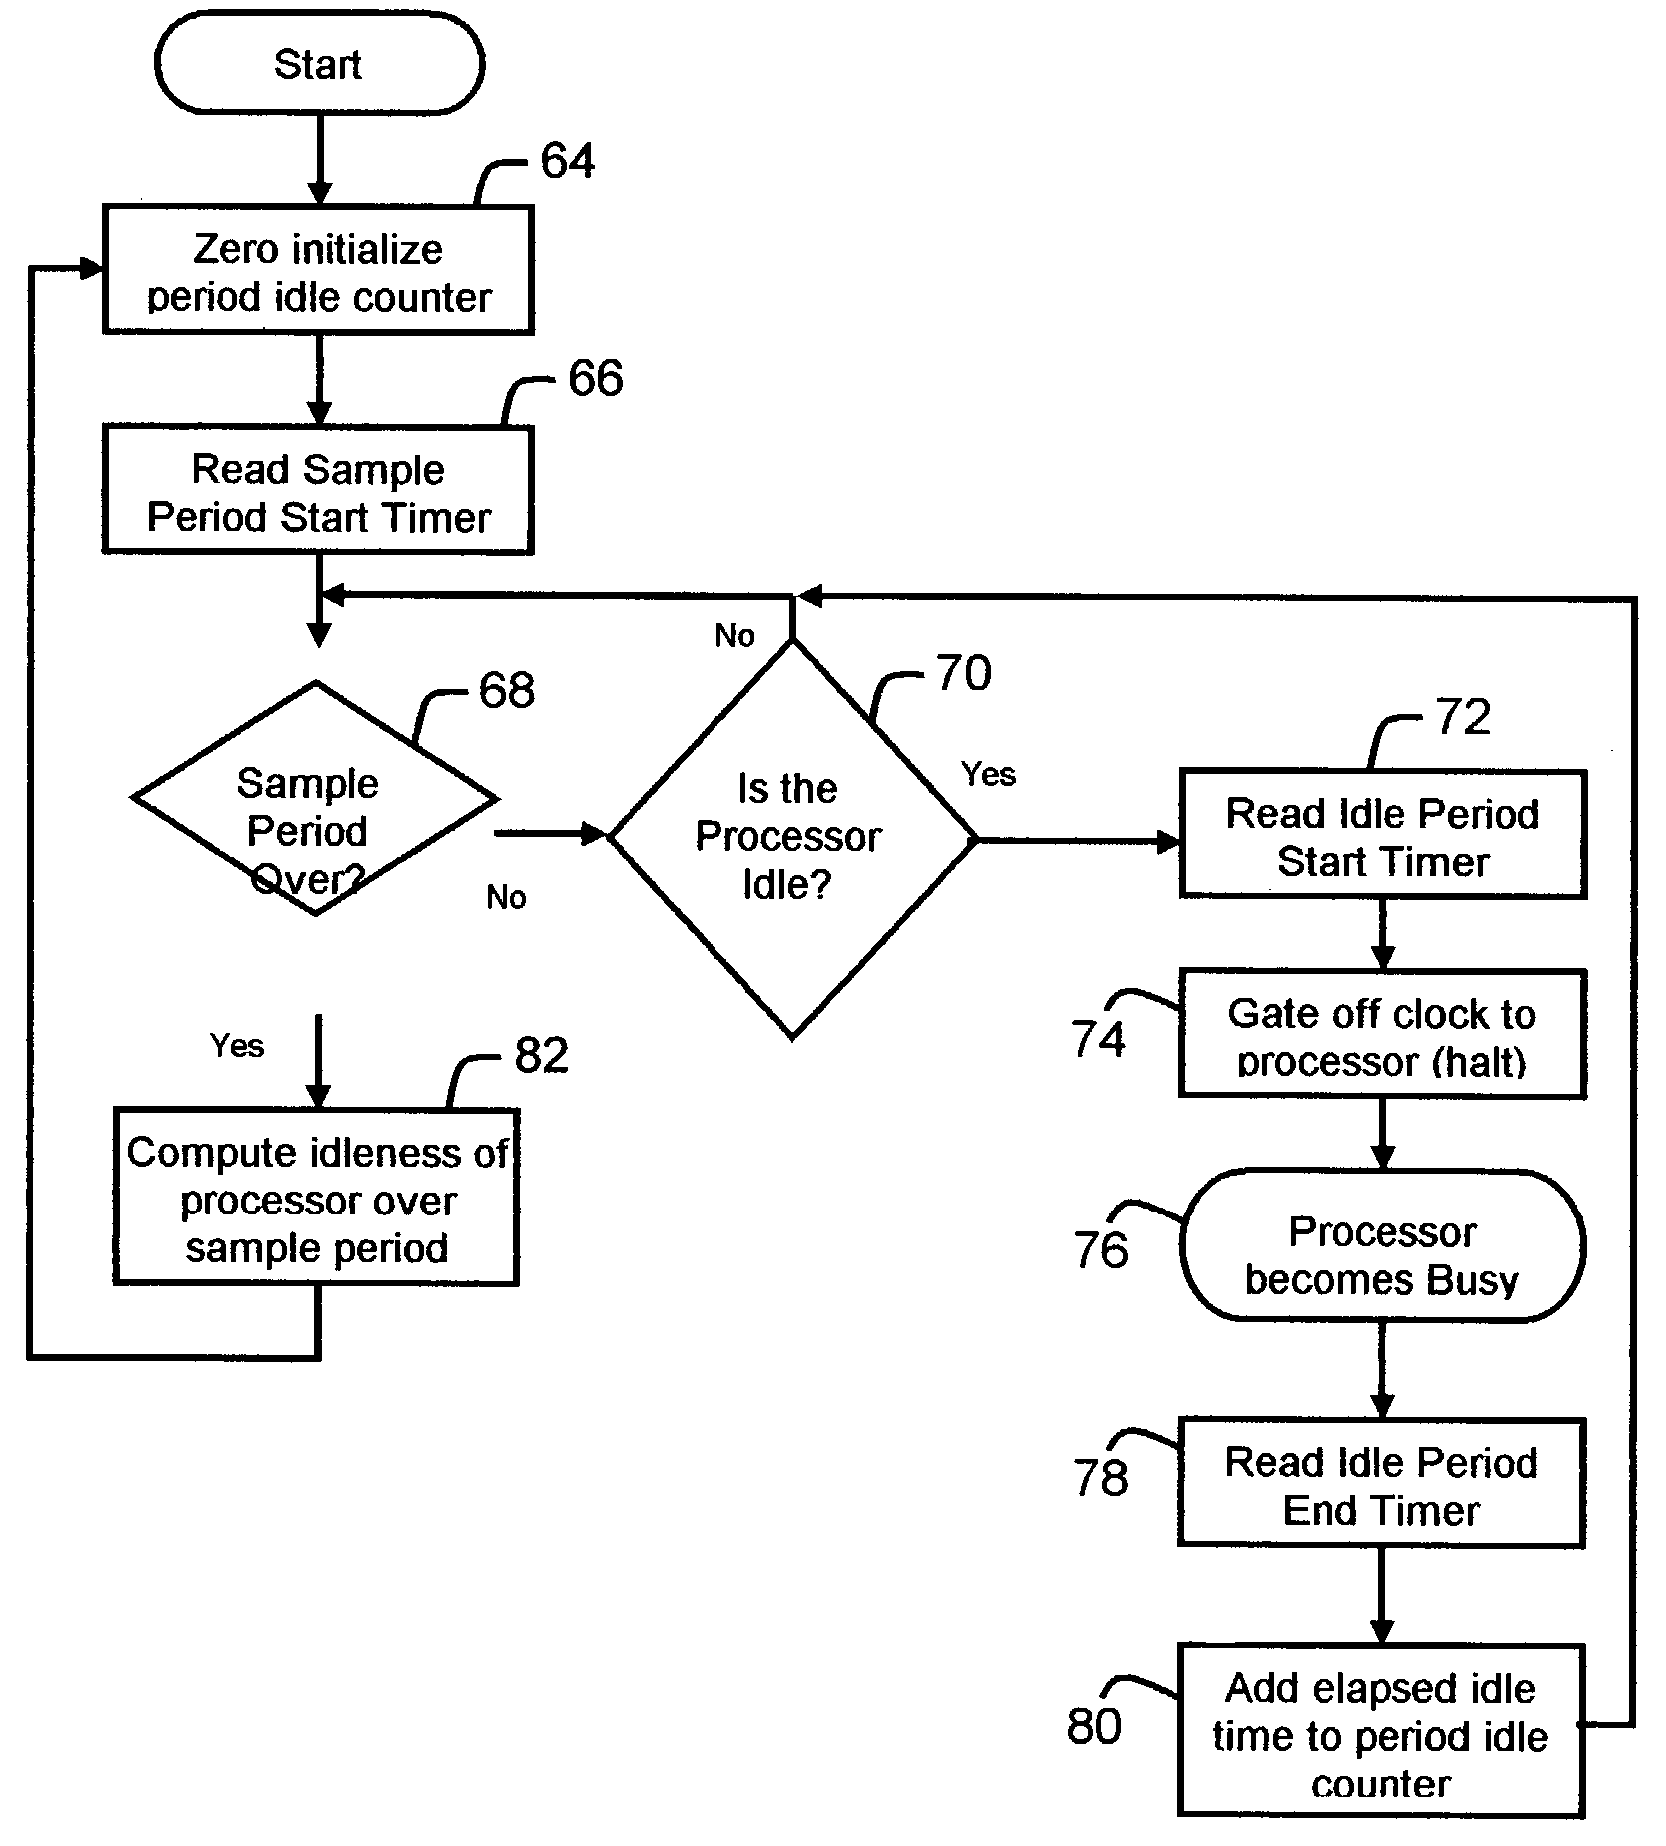 System clock power management for chips with multiple processing modules